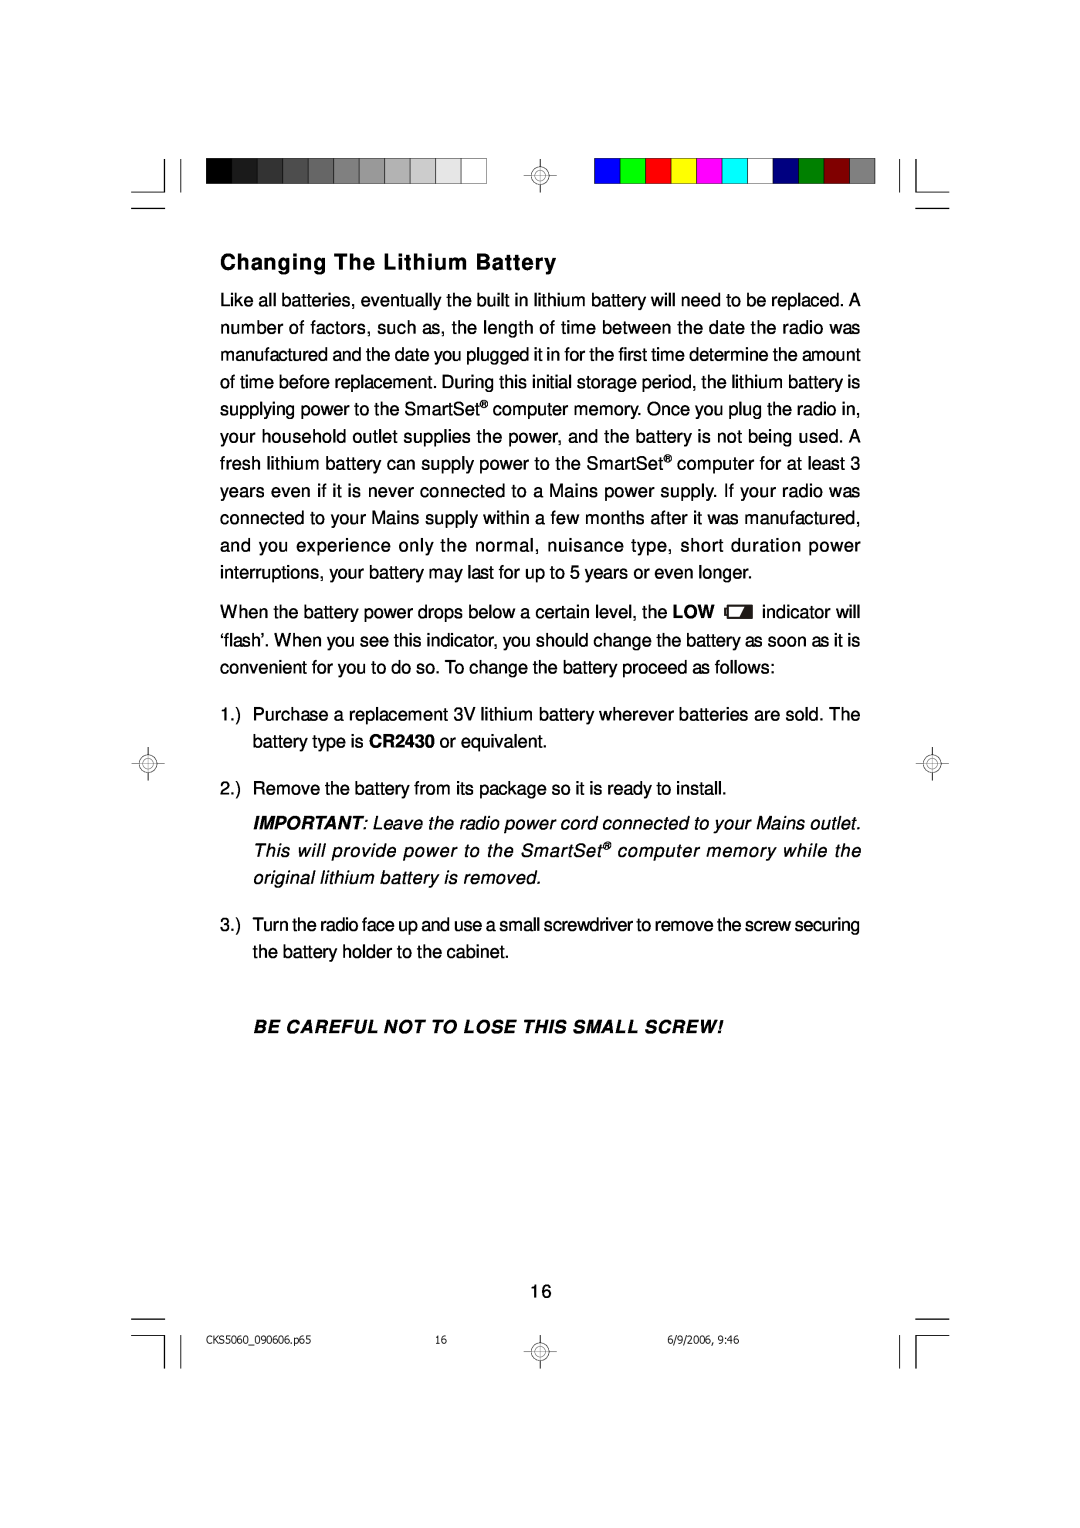 Emerson CKS5060S, CKS5060B owner manual Changing The Lithium Battery, Be Careful Not To Lose This Small Screw 